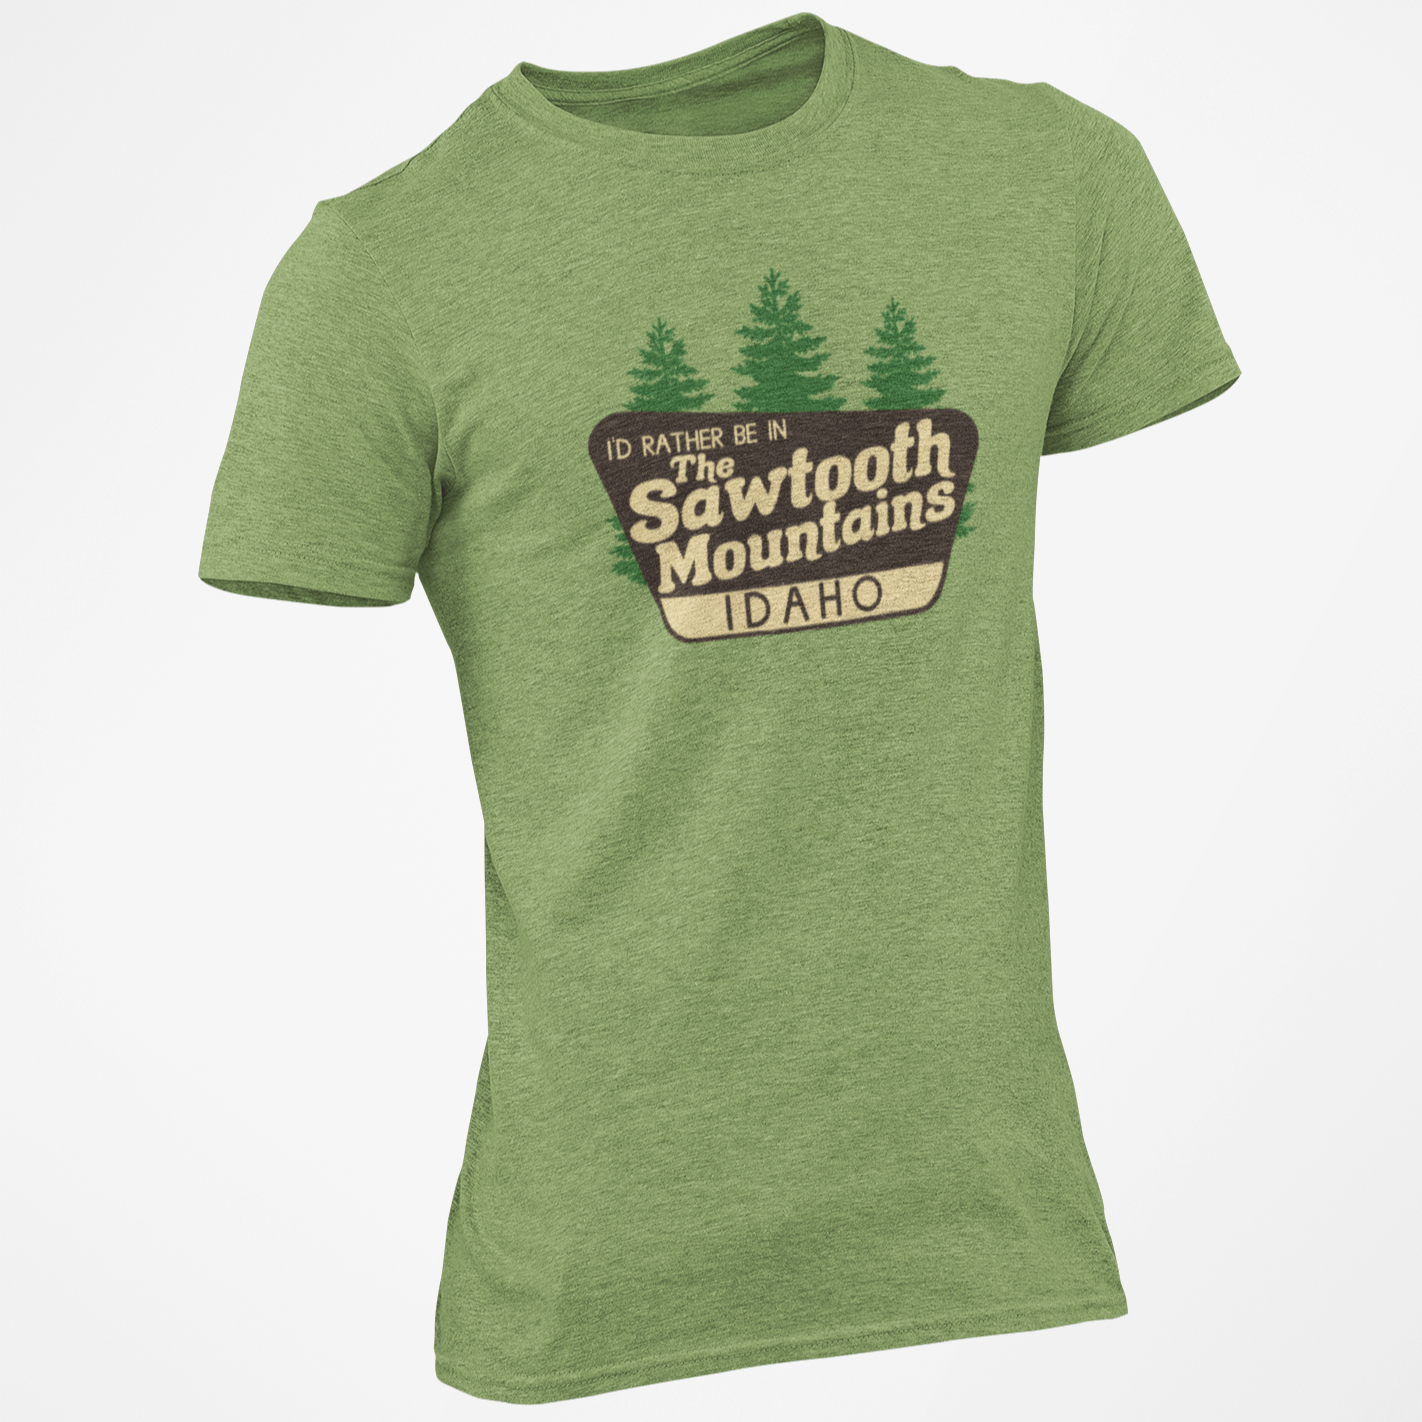 208 Supply Co T-shirt Small / Heather Green Sawtooth National Park Unisex Tee